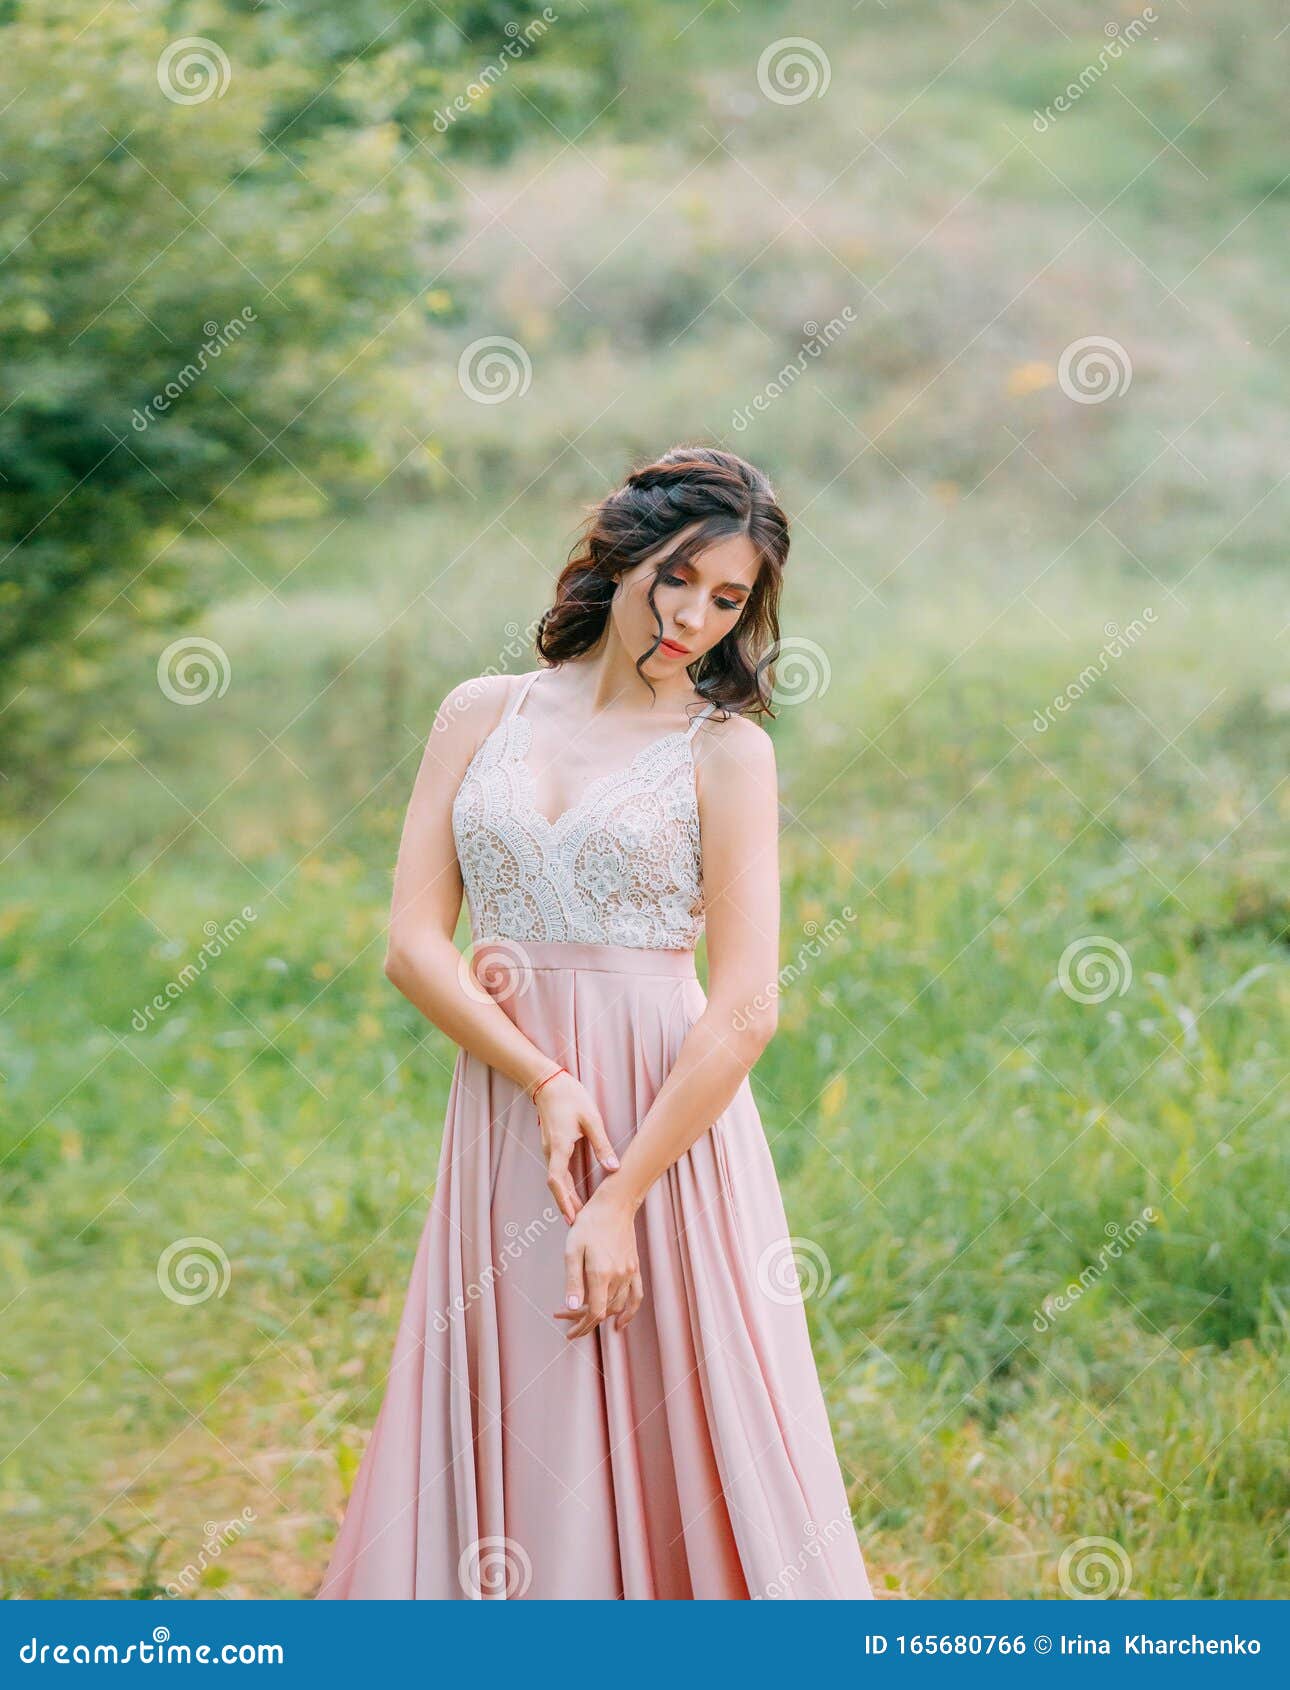 Woman Enjoying Nature in Delicate Elegant Pink Silk Dress with White ...